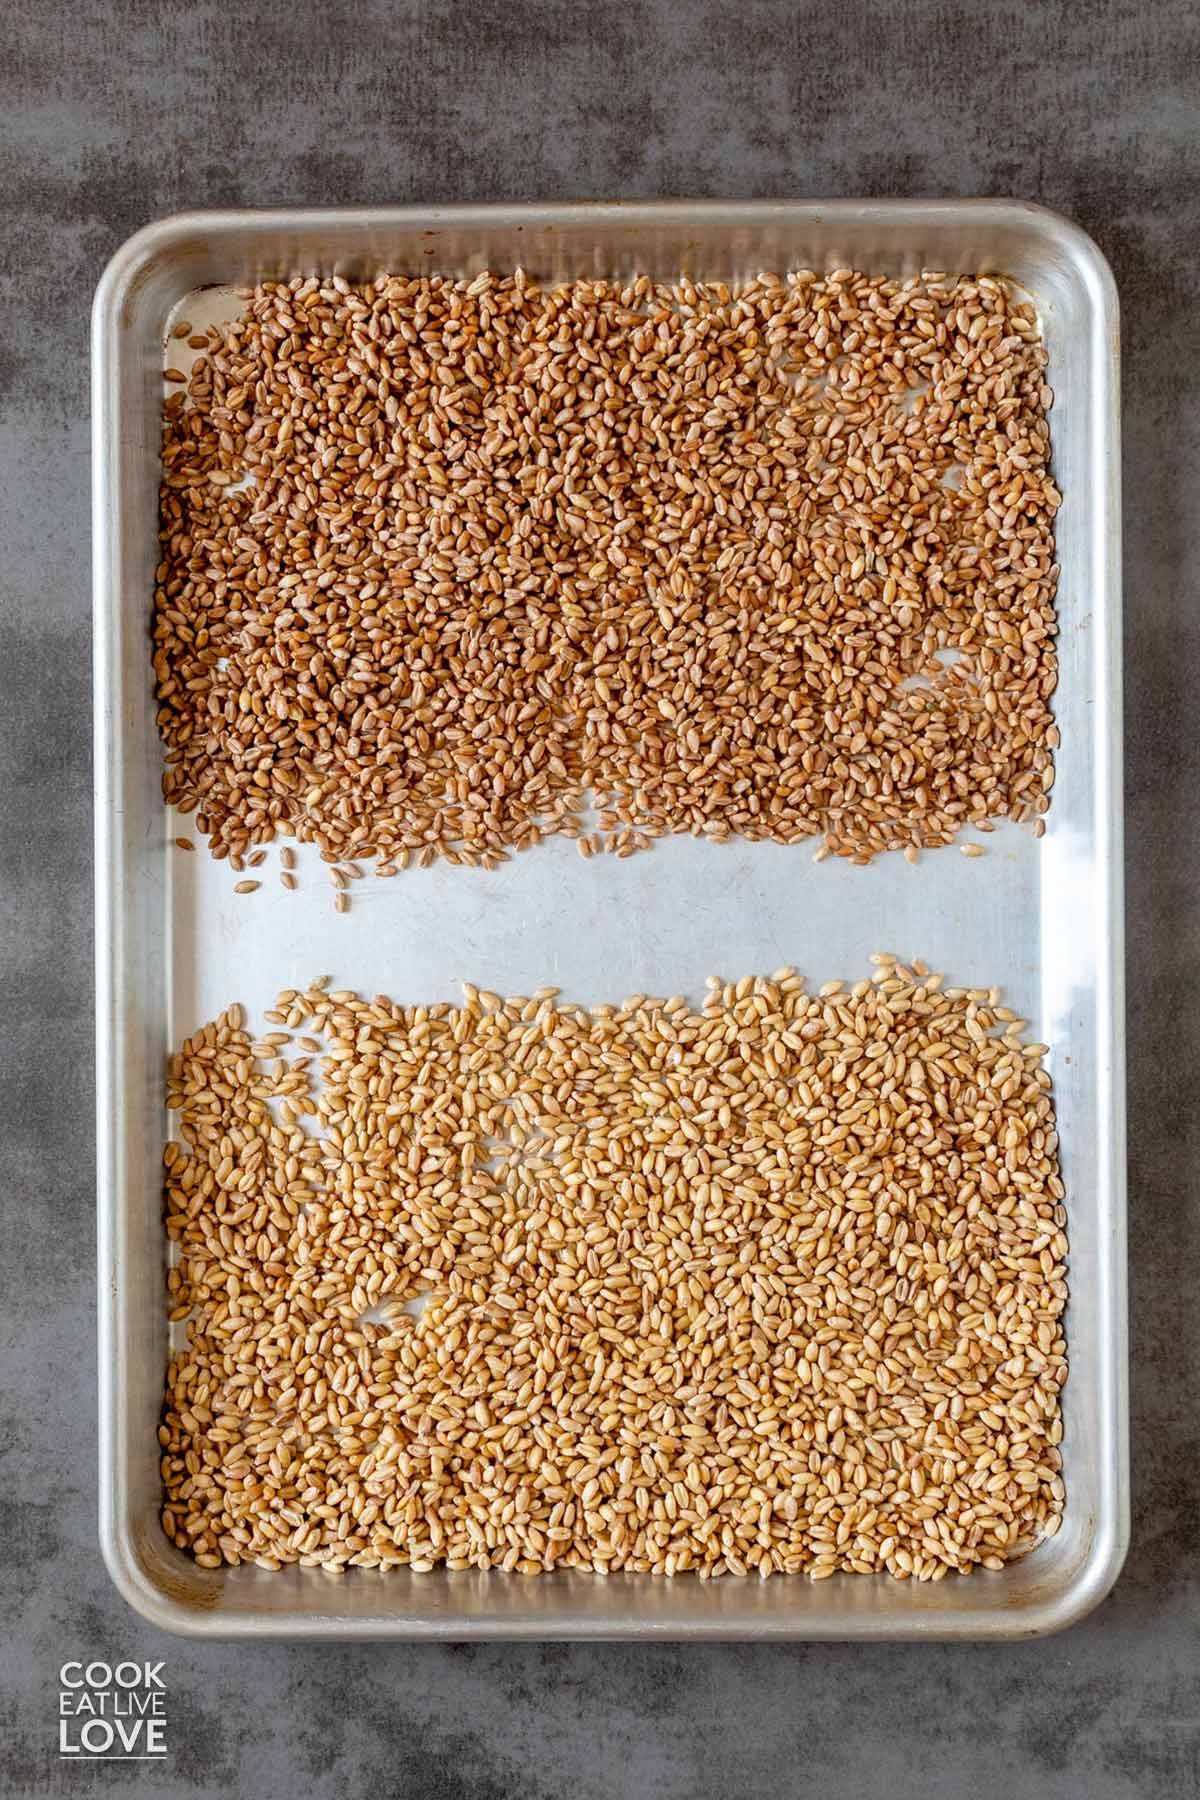 Wheat berries spread out on a baking pan to toast.